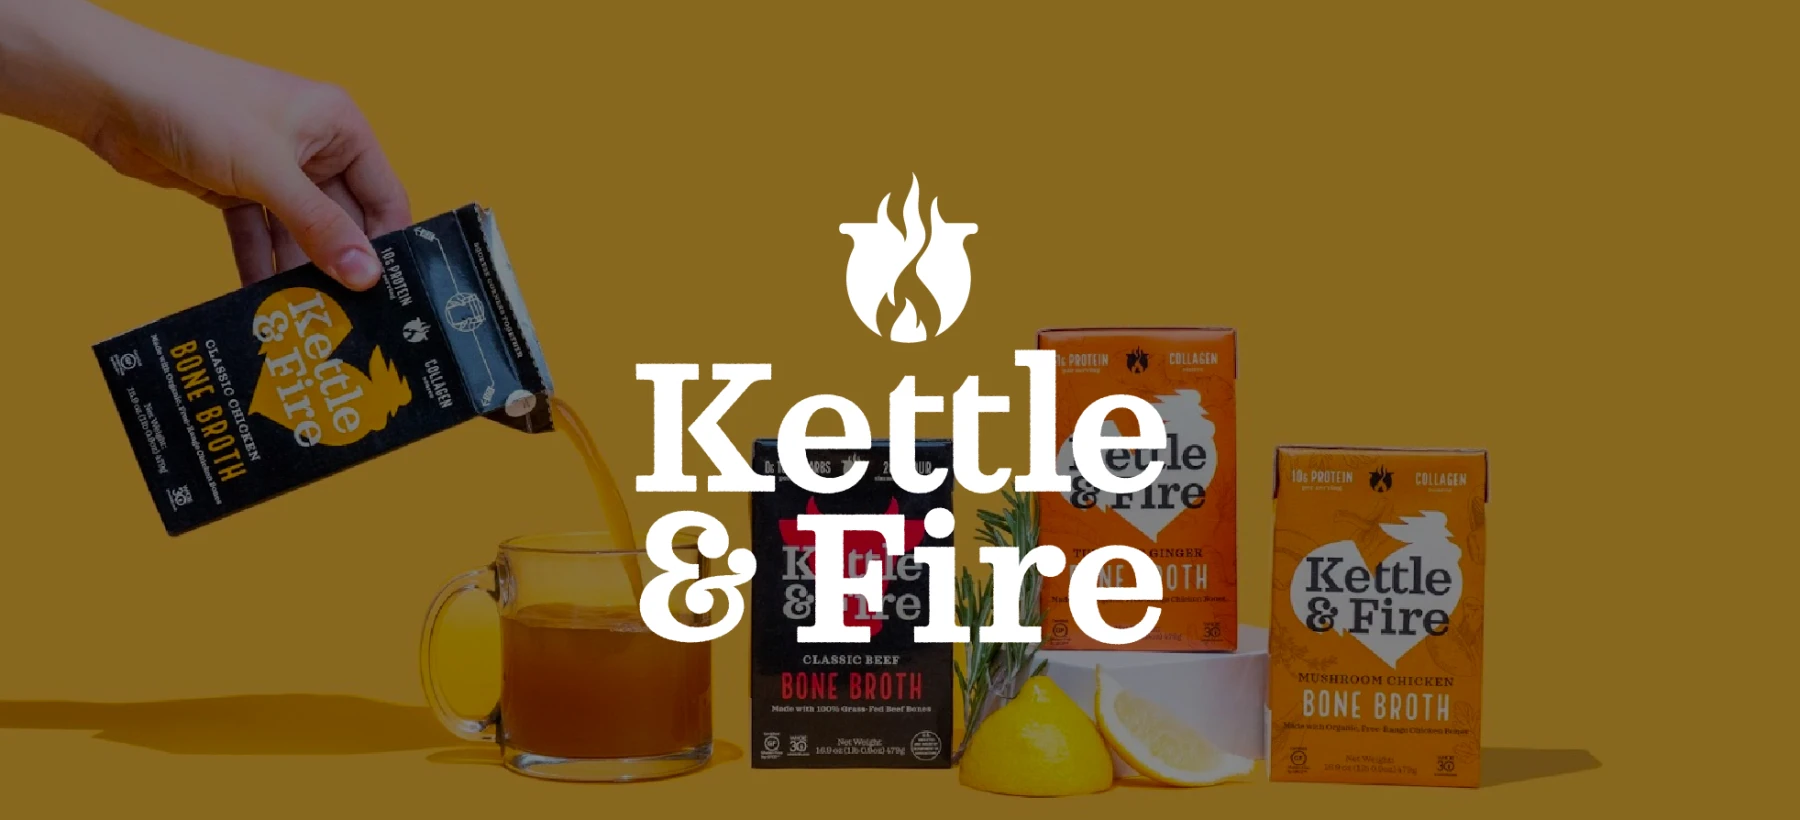 Kettle & Fire TV Campaign - header